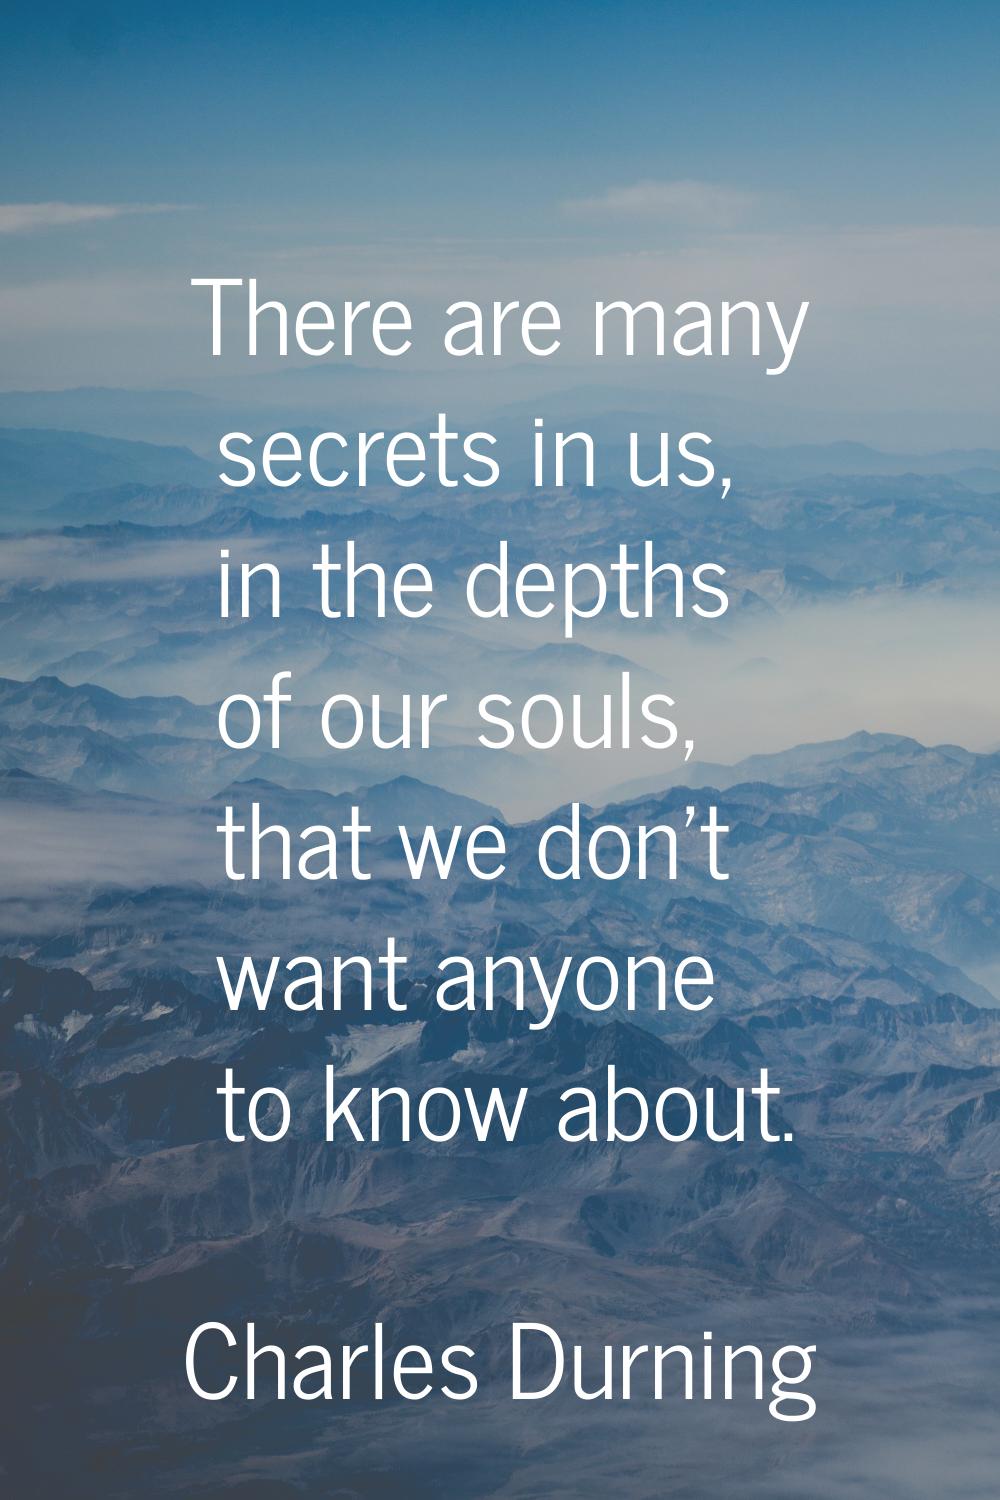 There are many secrets in us, in the depths of our souls, that we don't want anyone to know about.